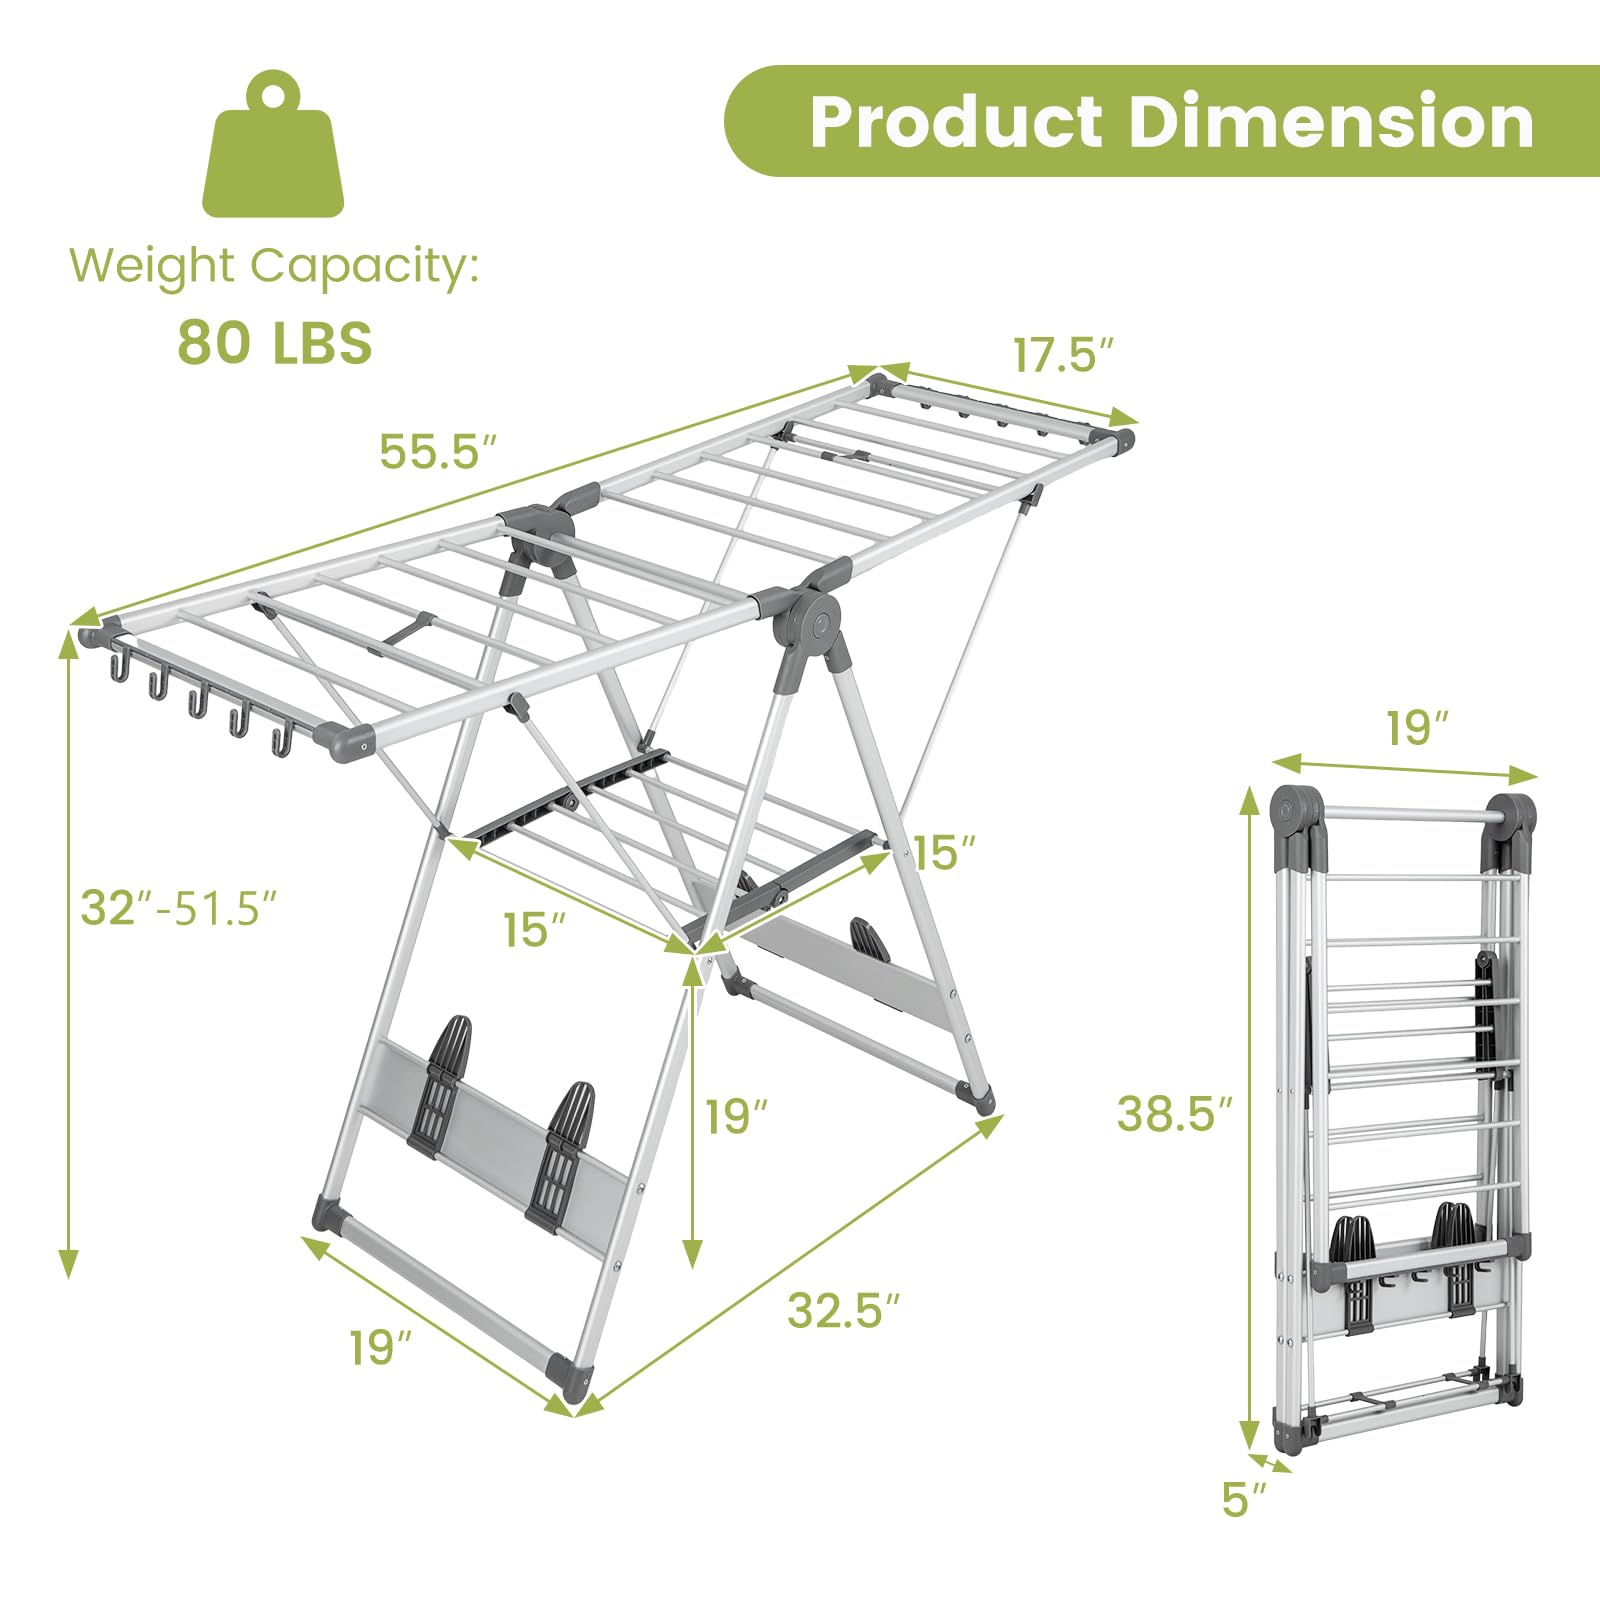 Giantex Clothes Drying Rack, 2-Layer Aluminum Foldable Laundry Drying Rack with 5-Level Adjustable Height